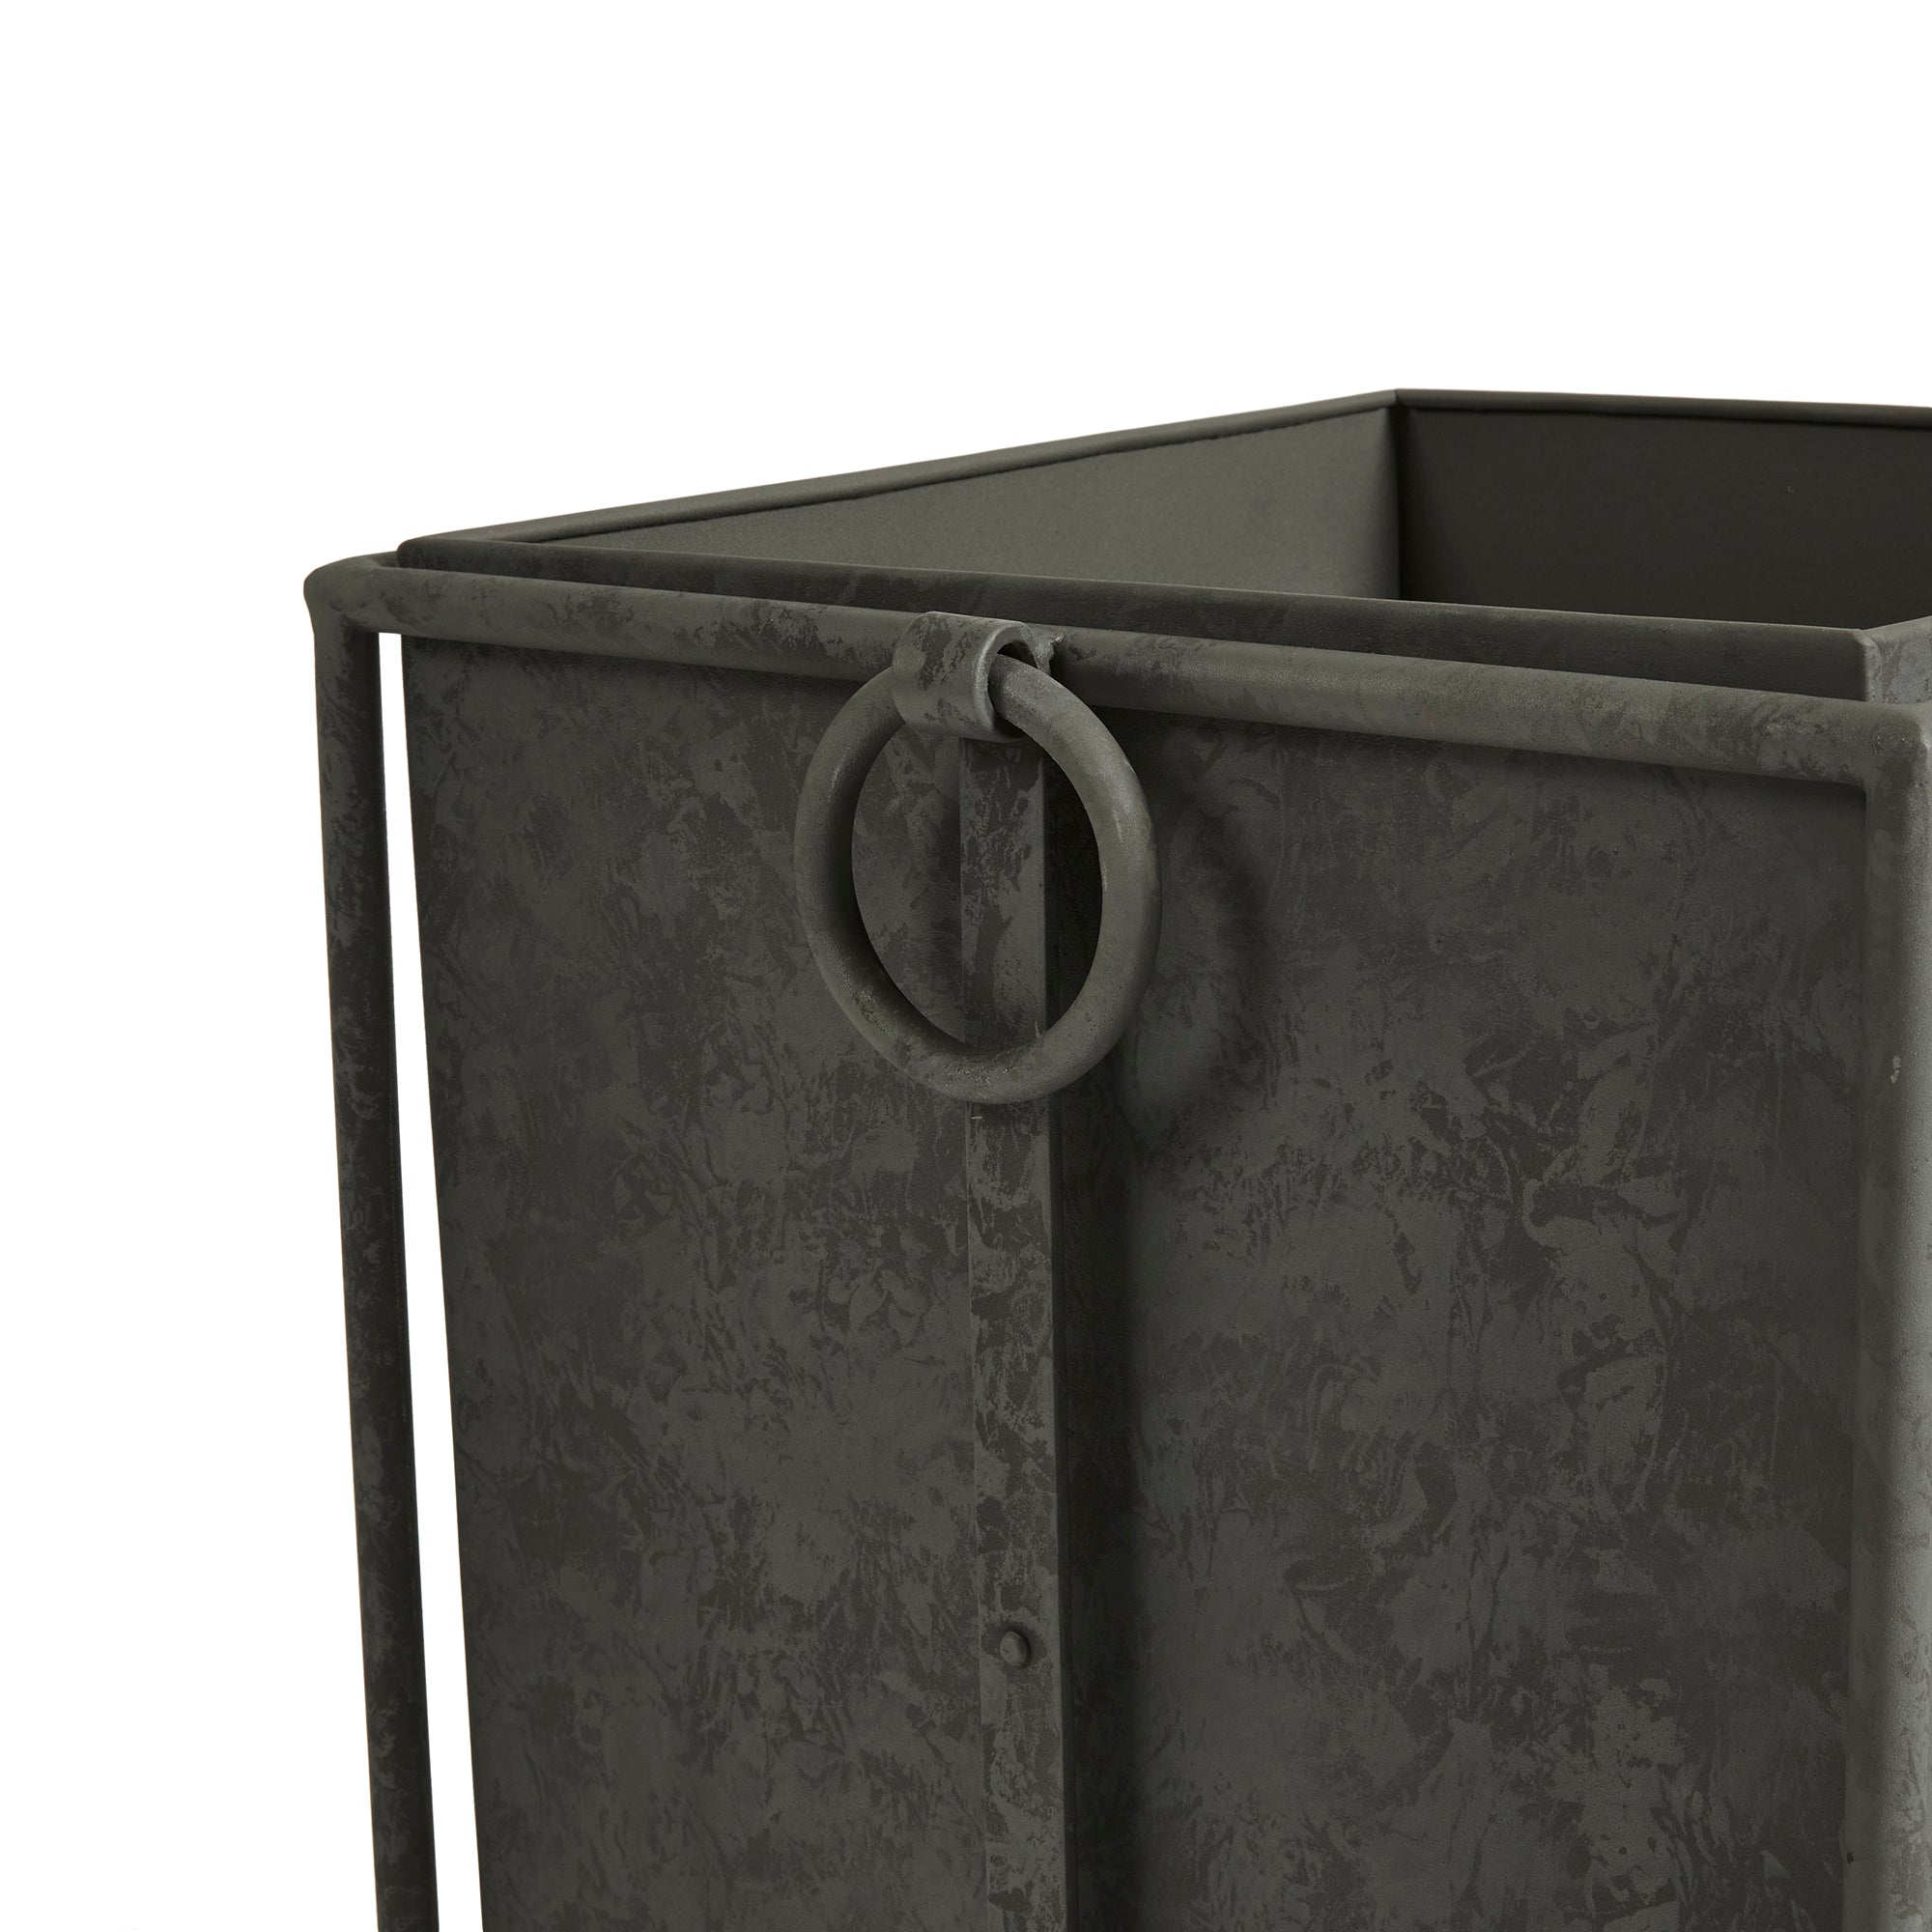 With metal liners that easily slide out, the Callahan Square Planter is as practical as it is handsome. The rounded handles and traditional design make it an outdoor classic. Amethyst Home provides interior design, new construction, custom furniture, and area rugs in the Winter Garden metro area.